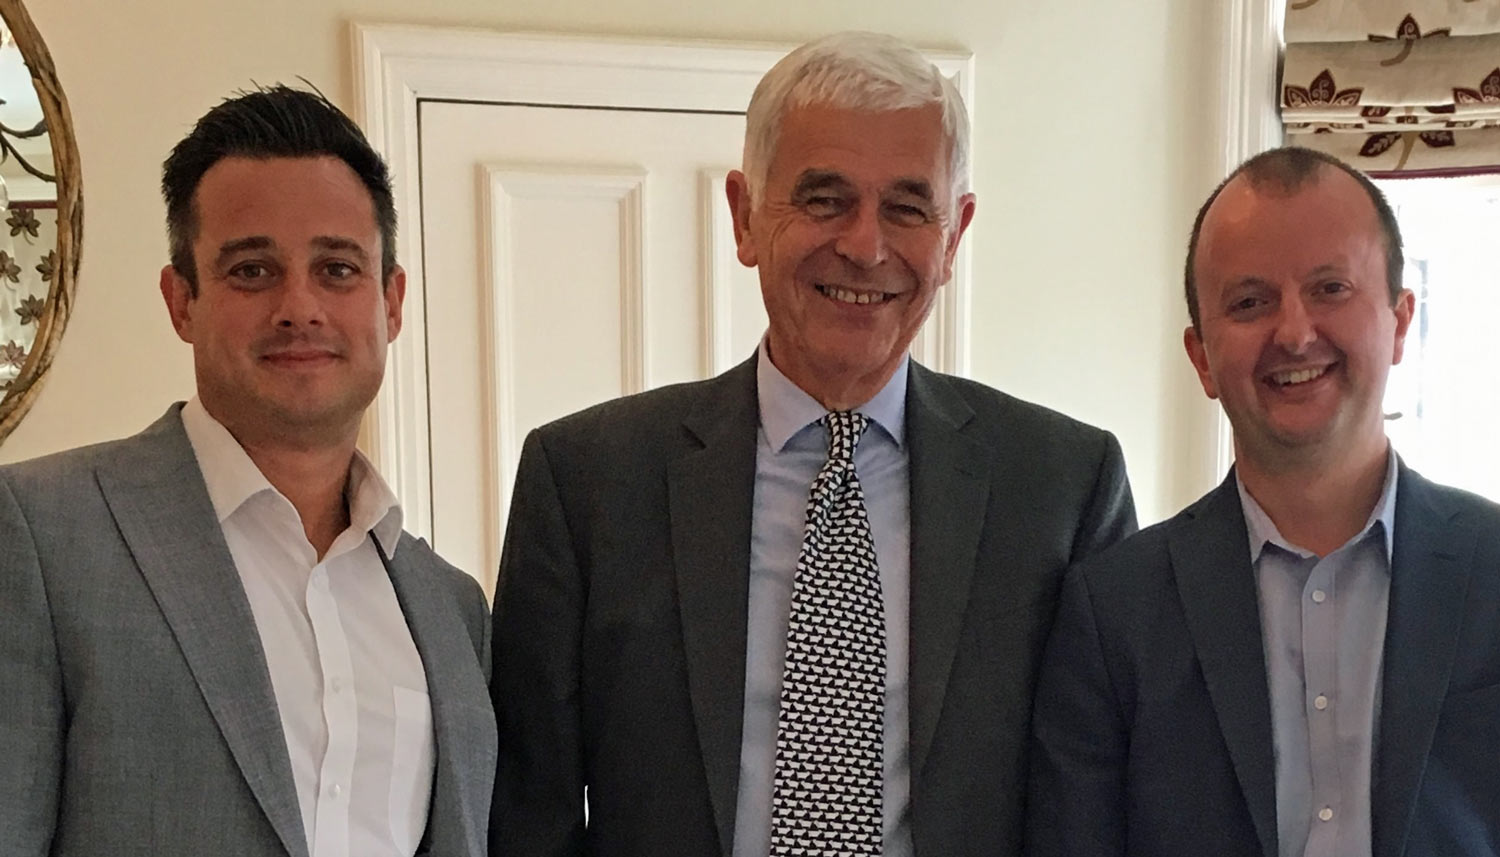 From left to right – Matt Johnson, Development Director at Flaxby Park, architect for the scheme Michael Wildblood MBE, from Wildblood Macdonald Architects, and Planning expert Neil Morton, from Savills